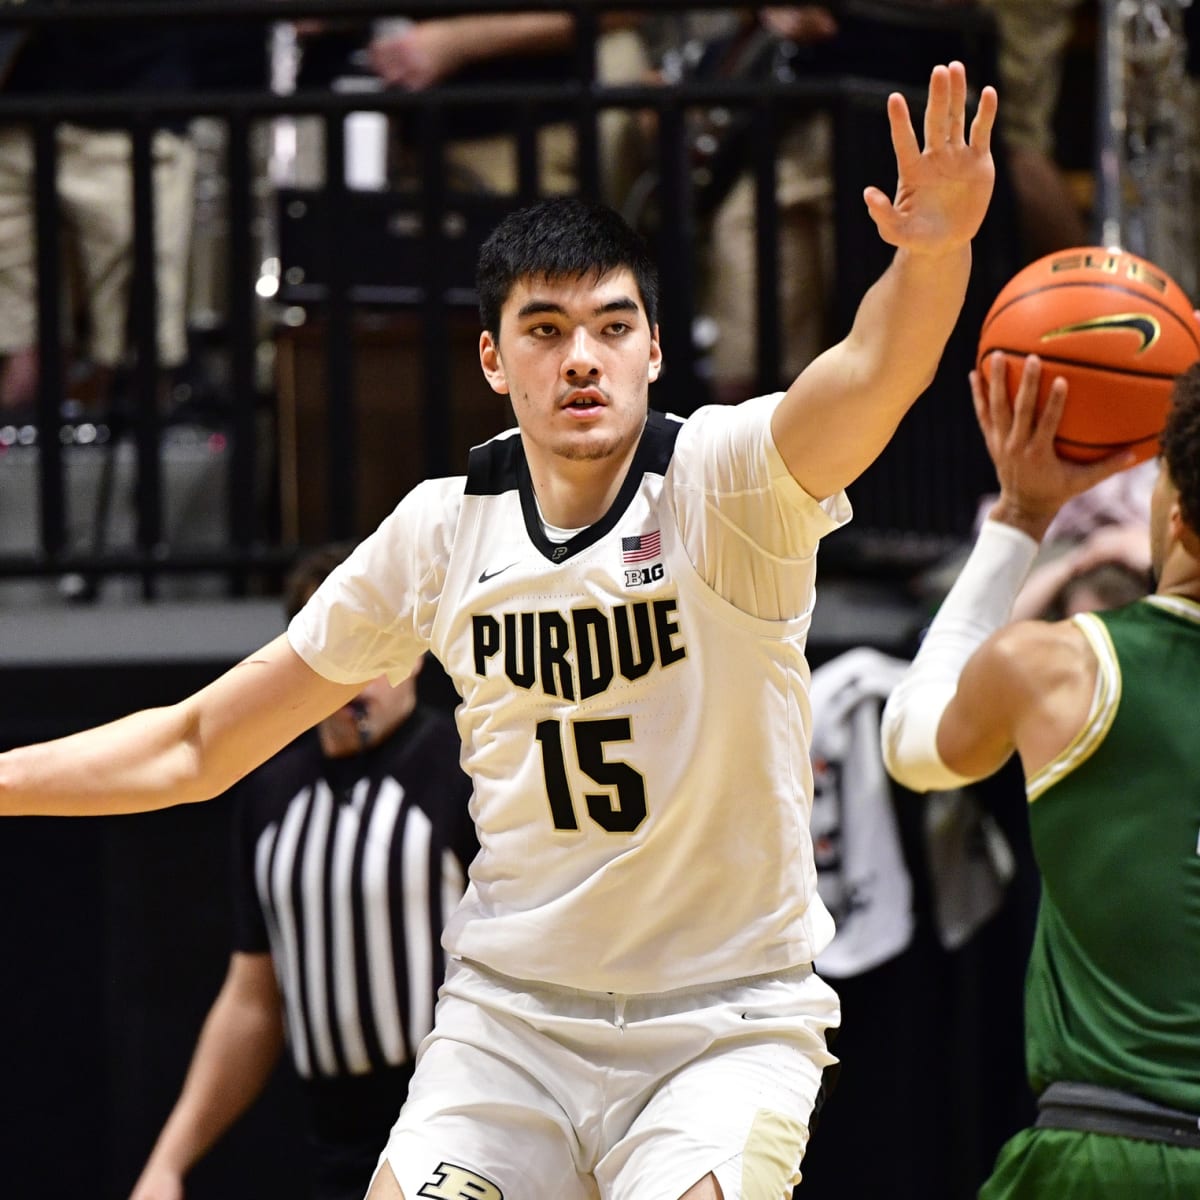 Purdue's Jaden Ivey drives hard to the basket and finishes a tomahawk dunk  on Indiana